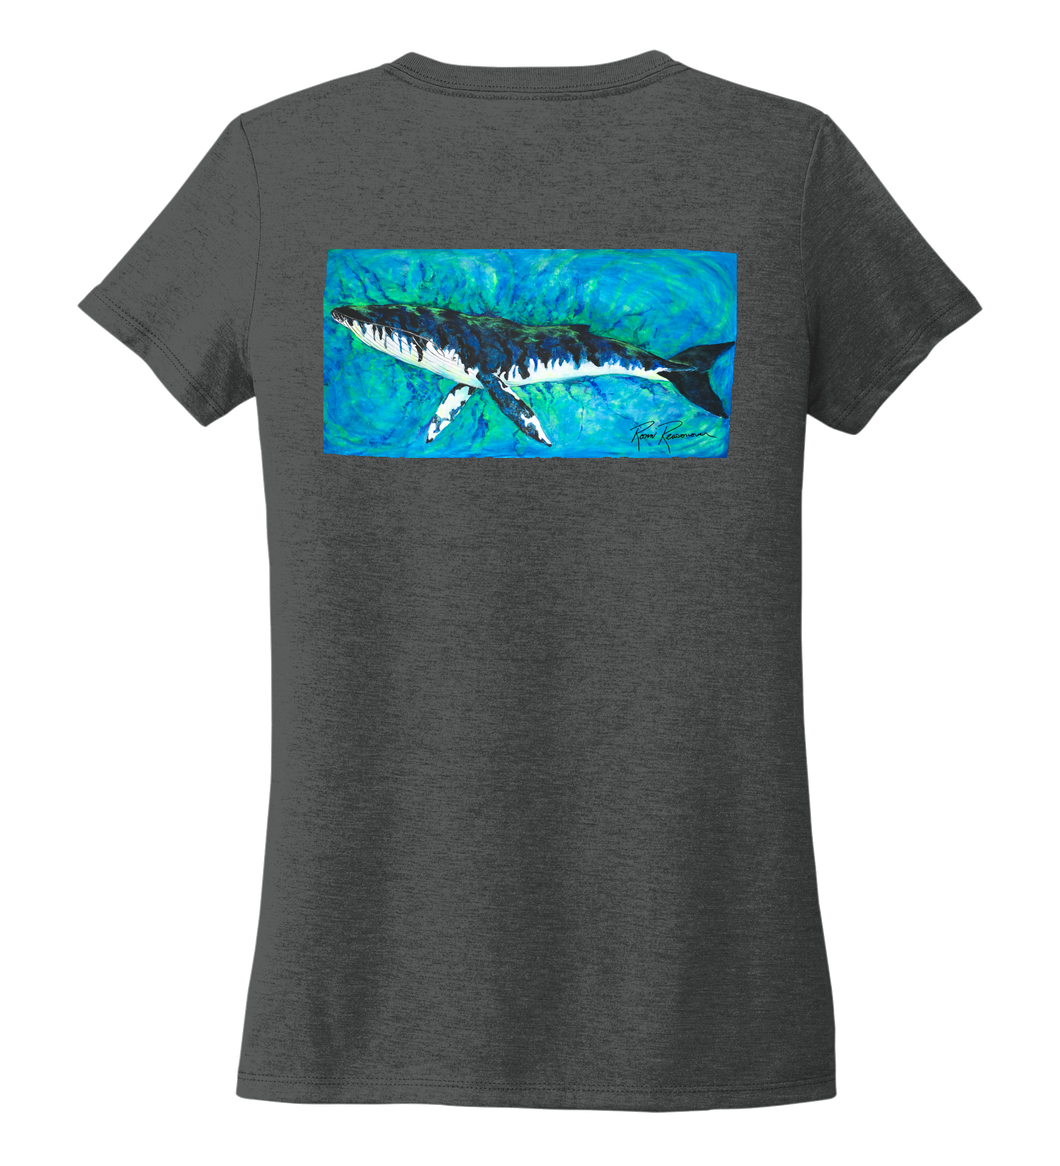 Ronnie Reasonover, The Whale, Women's V-neck T-shirt in Slate Black